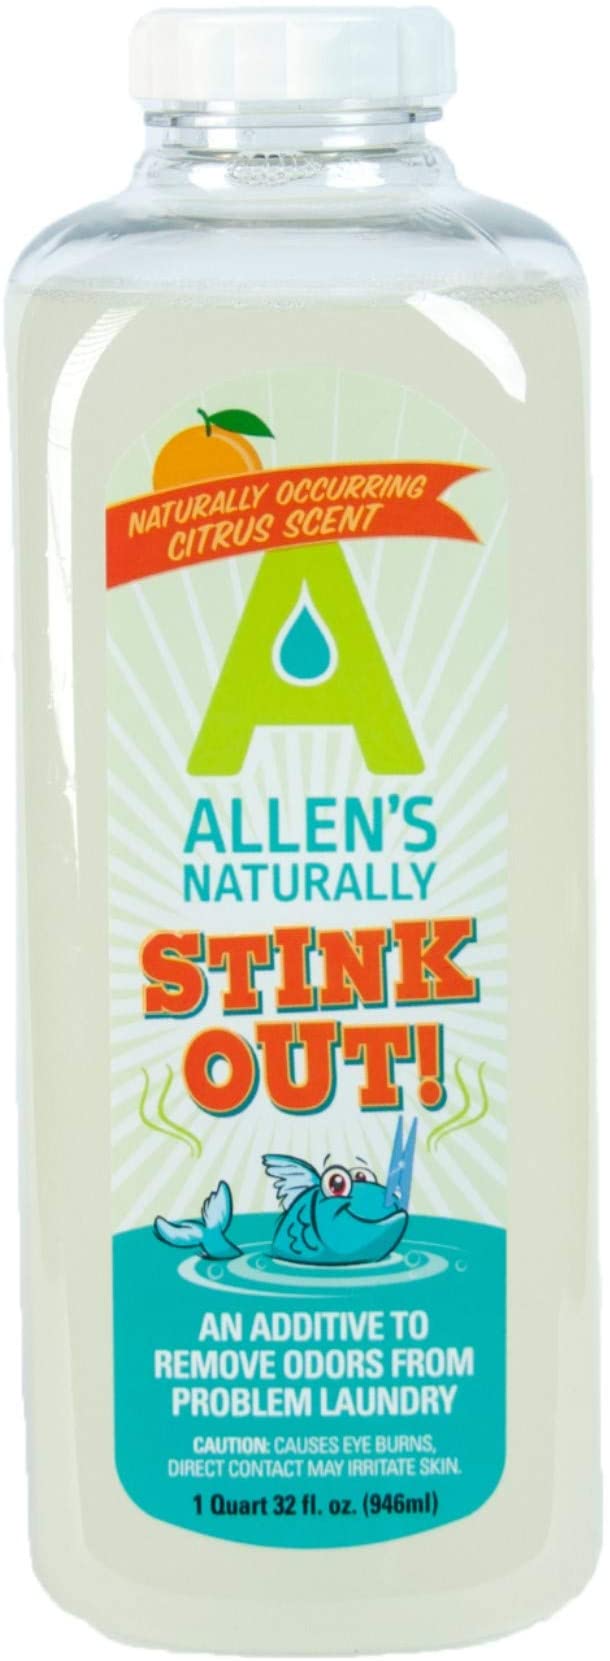 Allen's Naturally Stink Out Natural Stain Odor Remover, Safely Removes Stains & Odors for Diapers, Carpets, Towels, Bedding, Sportswear. for MCS (Multiple Chemical Sensitivity) 32 Ounces